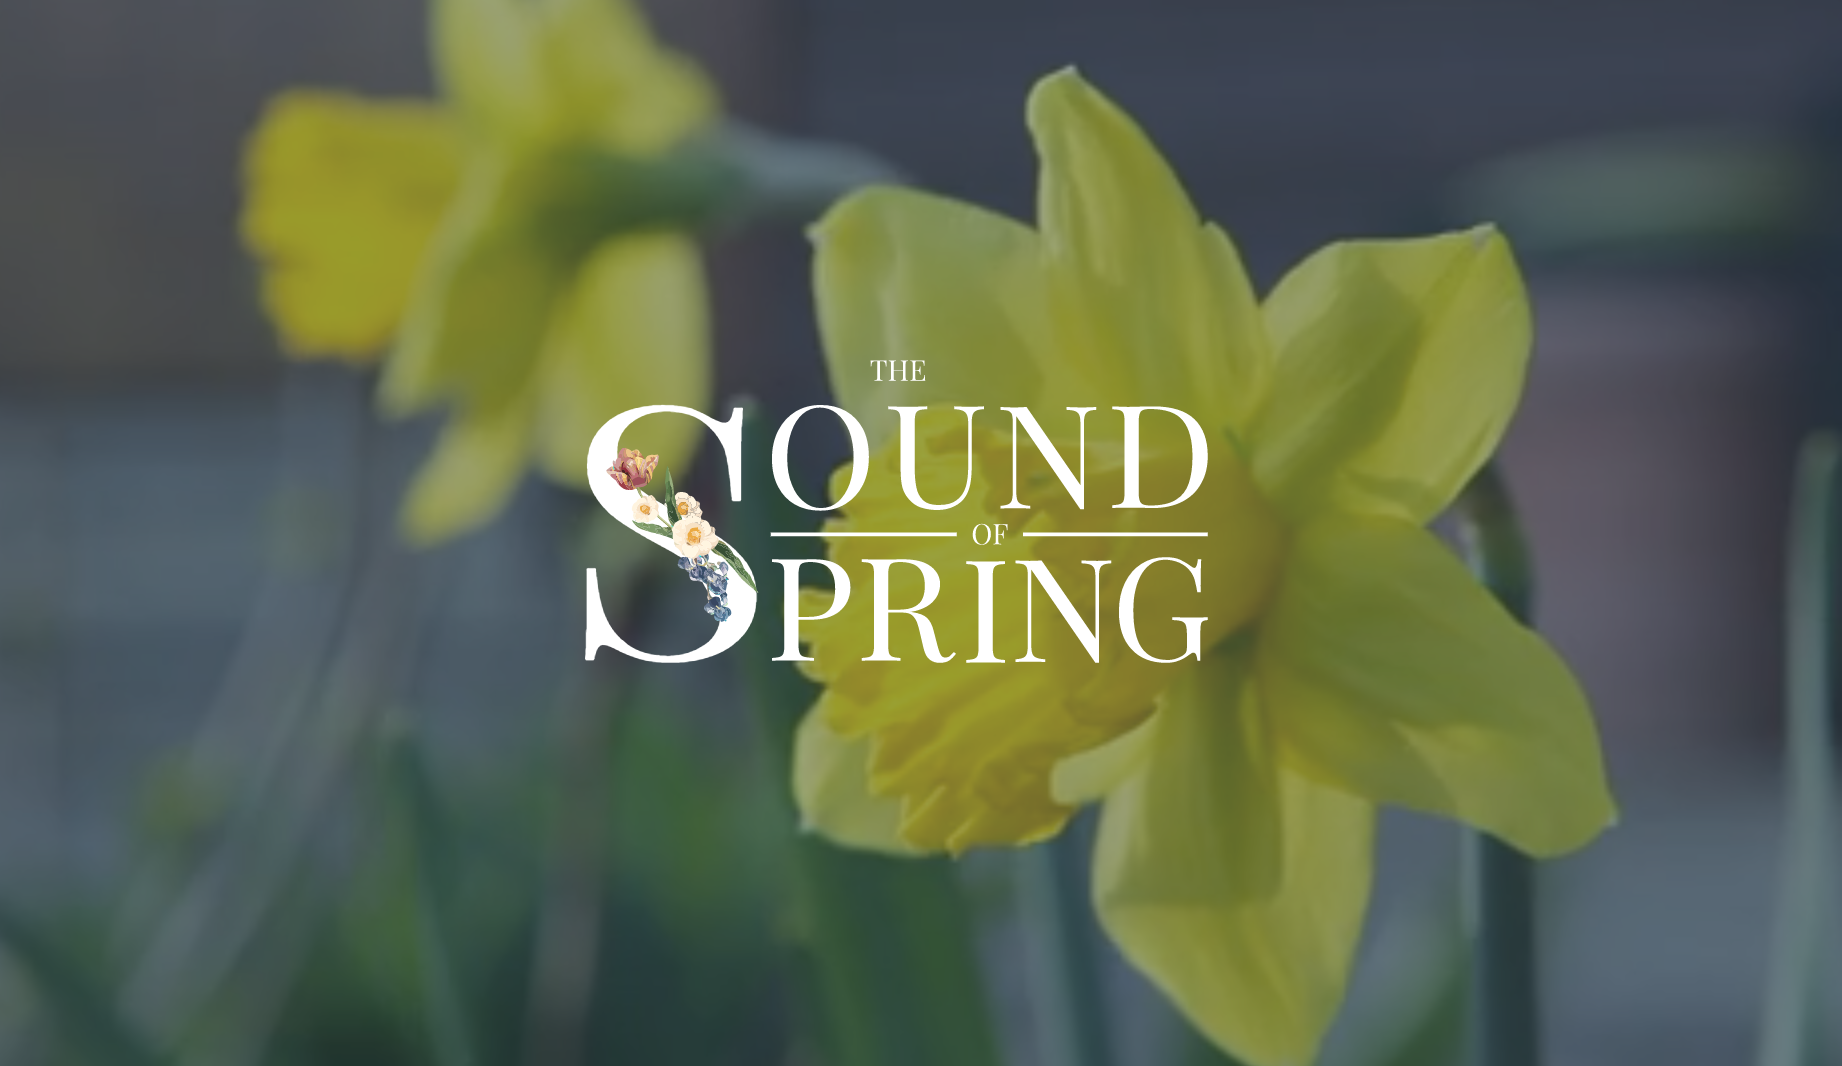 How "The Sound of Spring" came to life